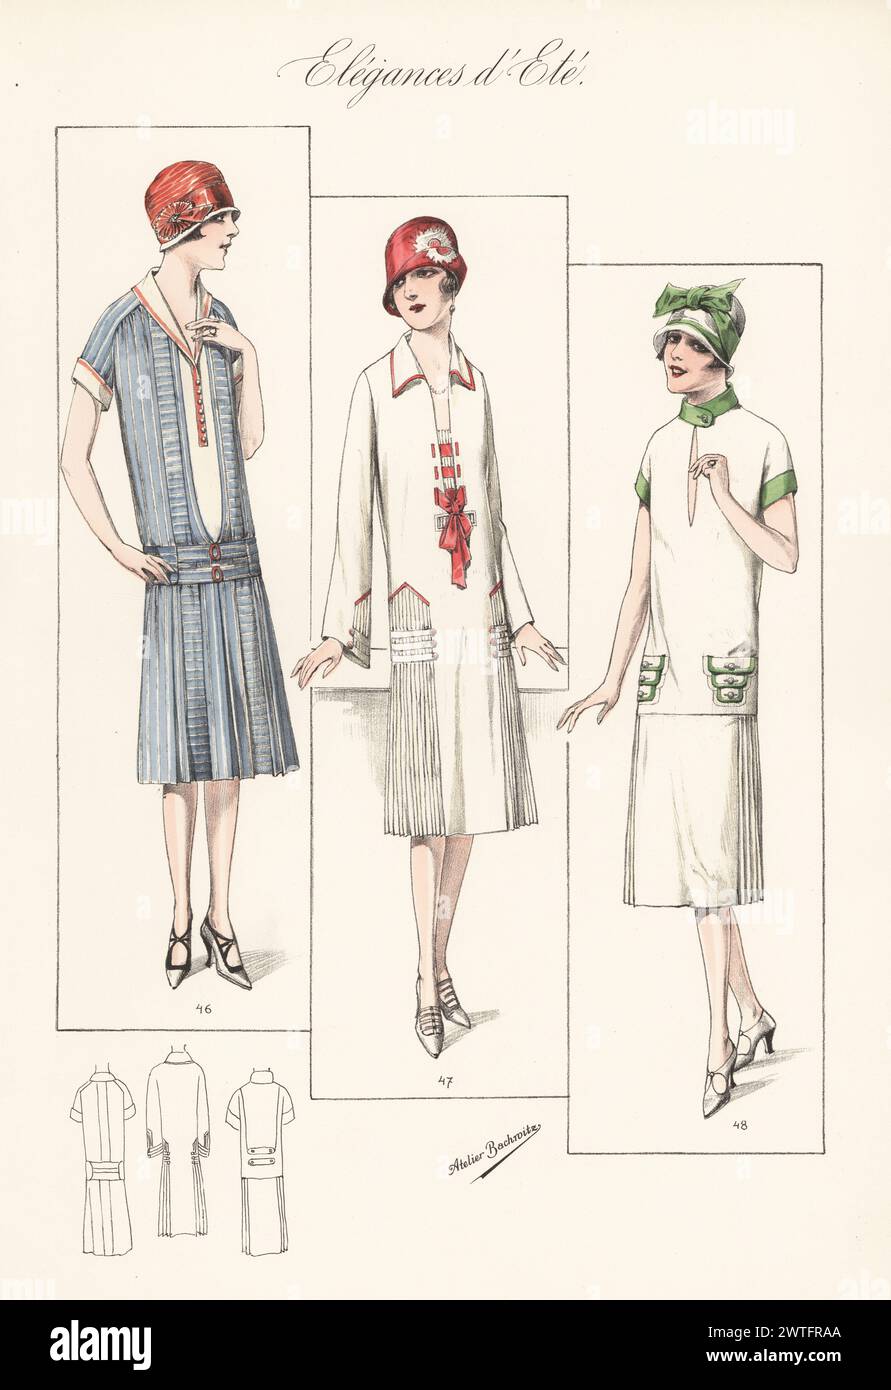 Flappers in cloche hats and summer dresses. Trotteur dress of striped natural silk 46, dress of cotton rep with coloured binding 47, jumper dress of crepella with green collar, pocket flaps and cuffs 48. Handcoloured lithograph by Atelier Bachwitz from Modell-Kleider fur den Hochsommer, Elegances d’Ete, Fashions for the Hot Season, Atelier Bachwitz AG, Vienna, 1926. Stock Photo